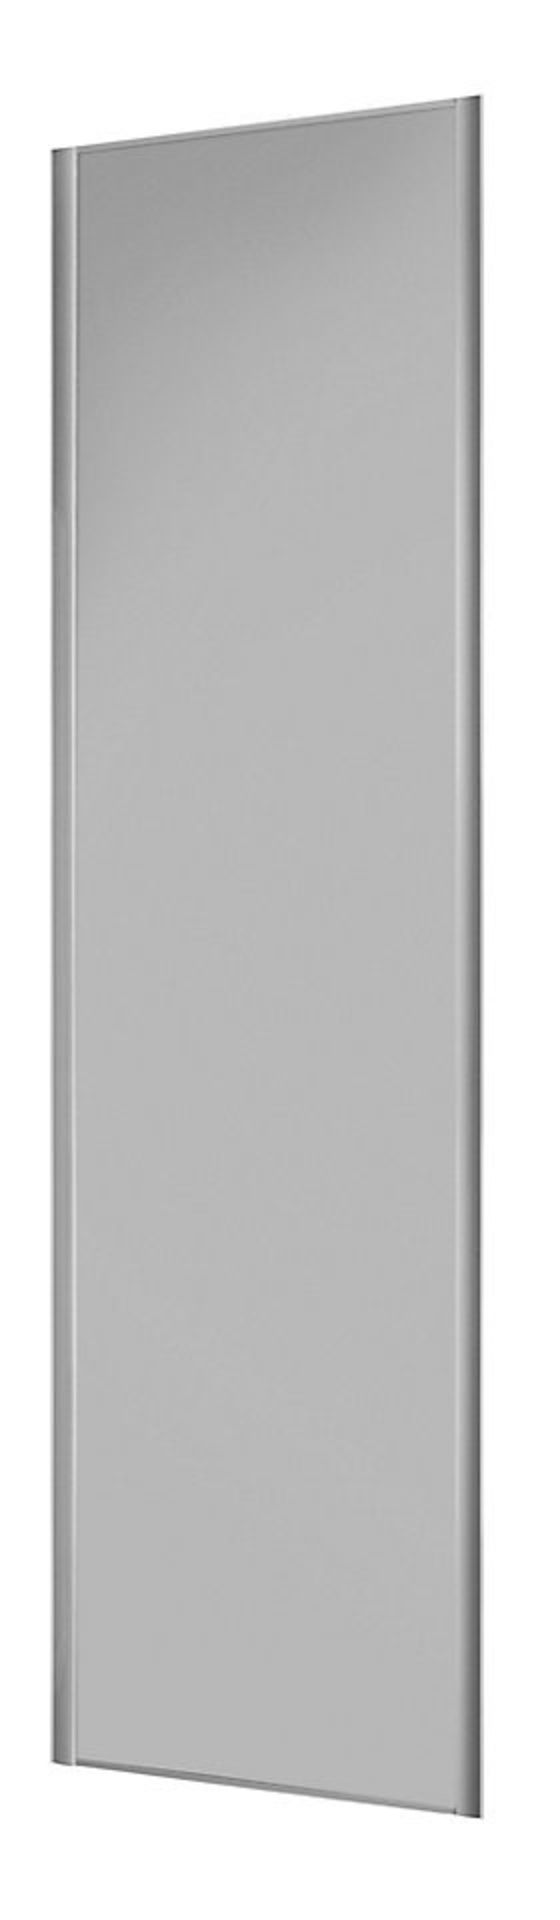 2 x VALLA 1 Sliding Wardrobe Door In Light Grey With Grey Lacquered Steel Profiles - CL373 - Ref: NC